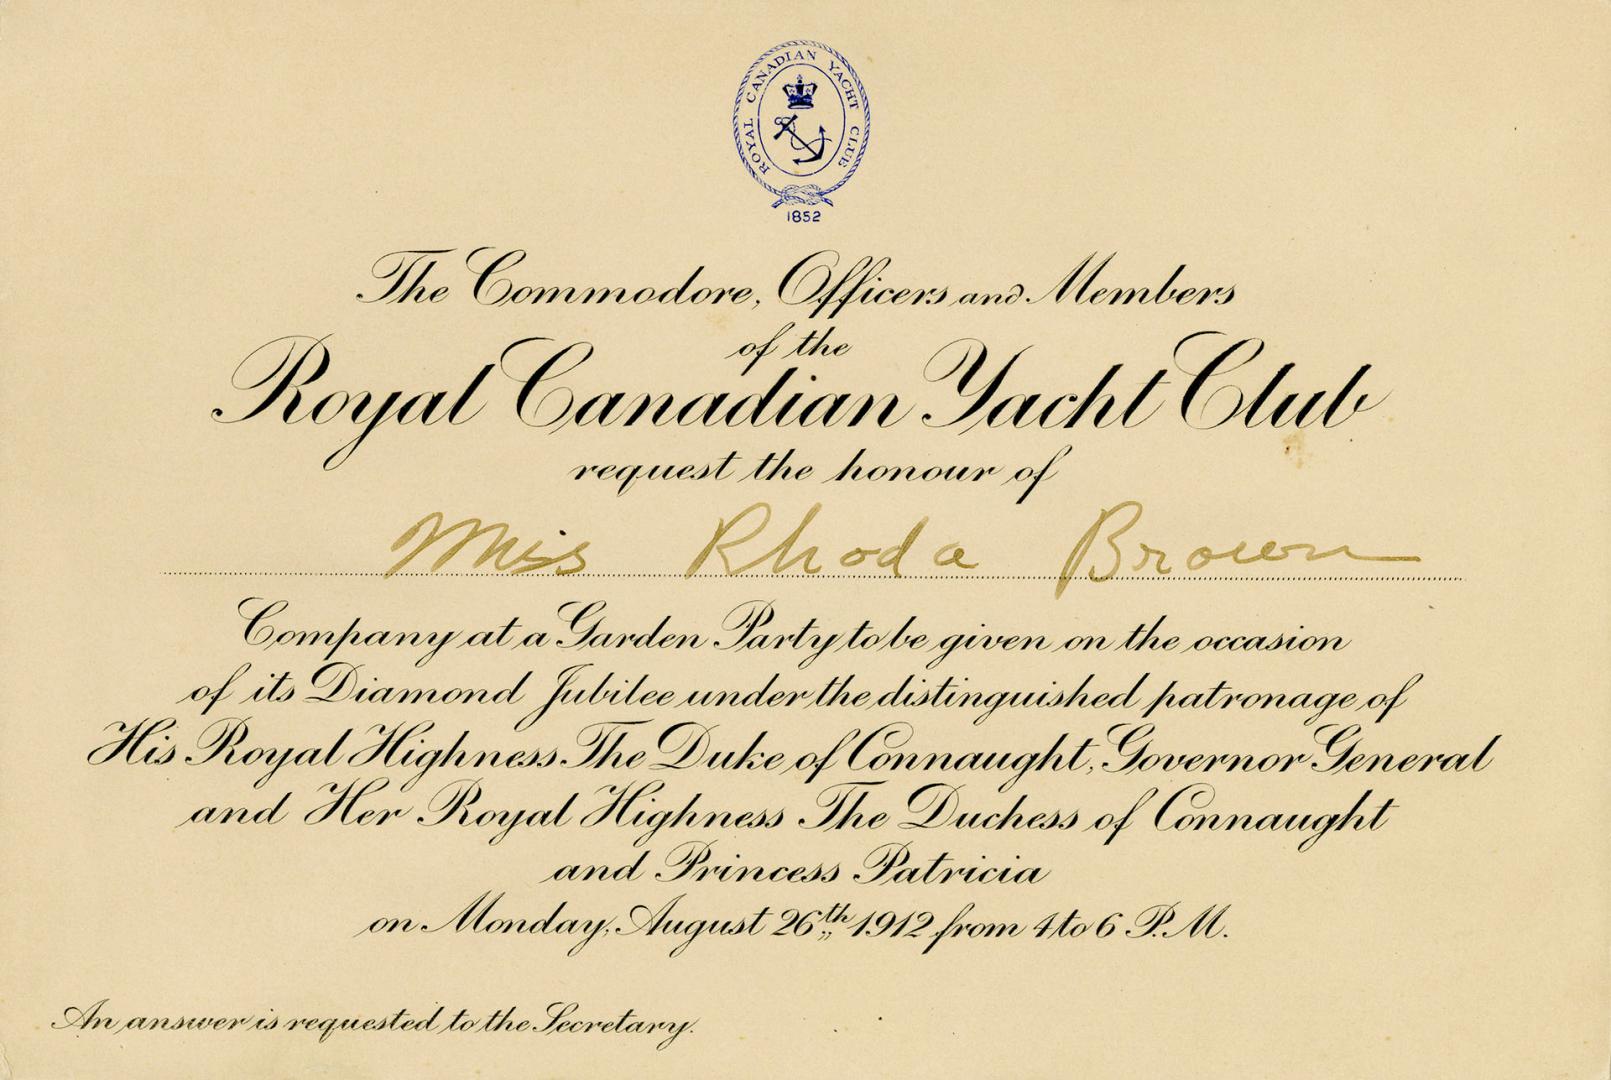 The commodore, officers and members of the Royal Canadian Yacht Club request the honour of